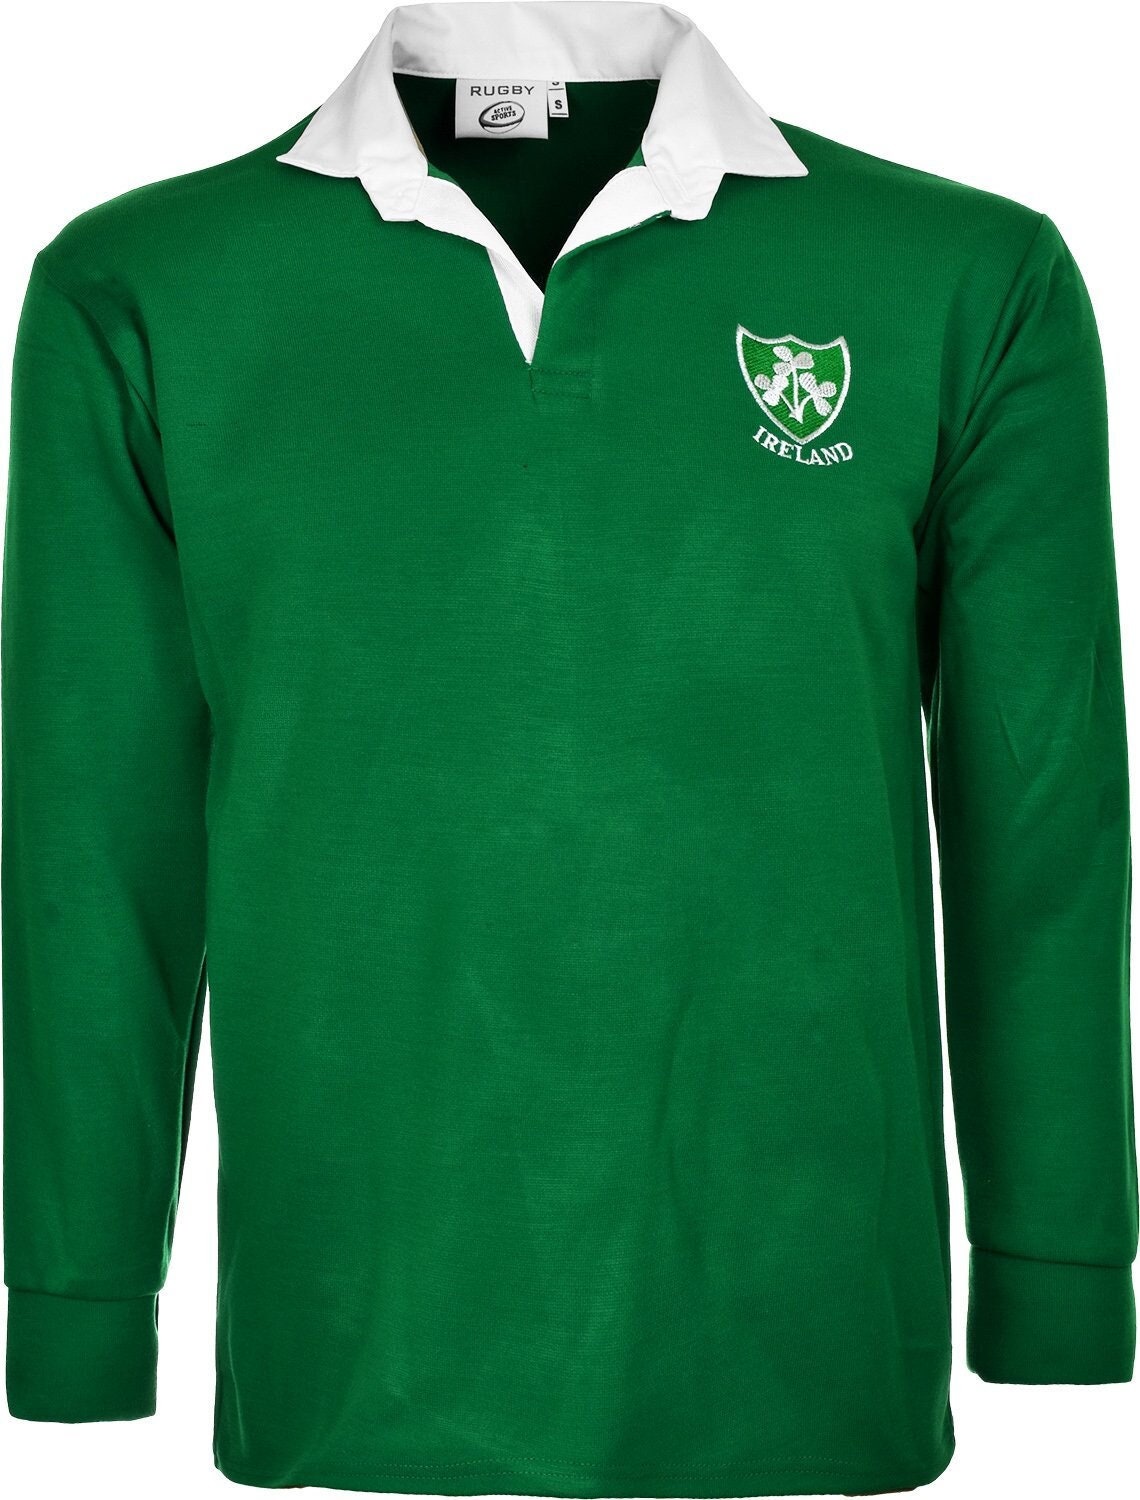 Drapeau Irlande Polo Irish Rugby T-Shirt Maillot Irlande Rugby 